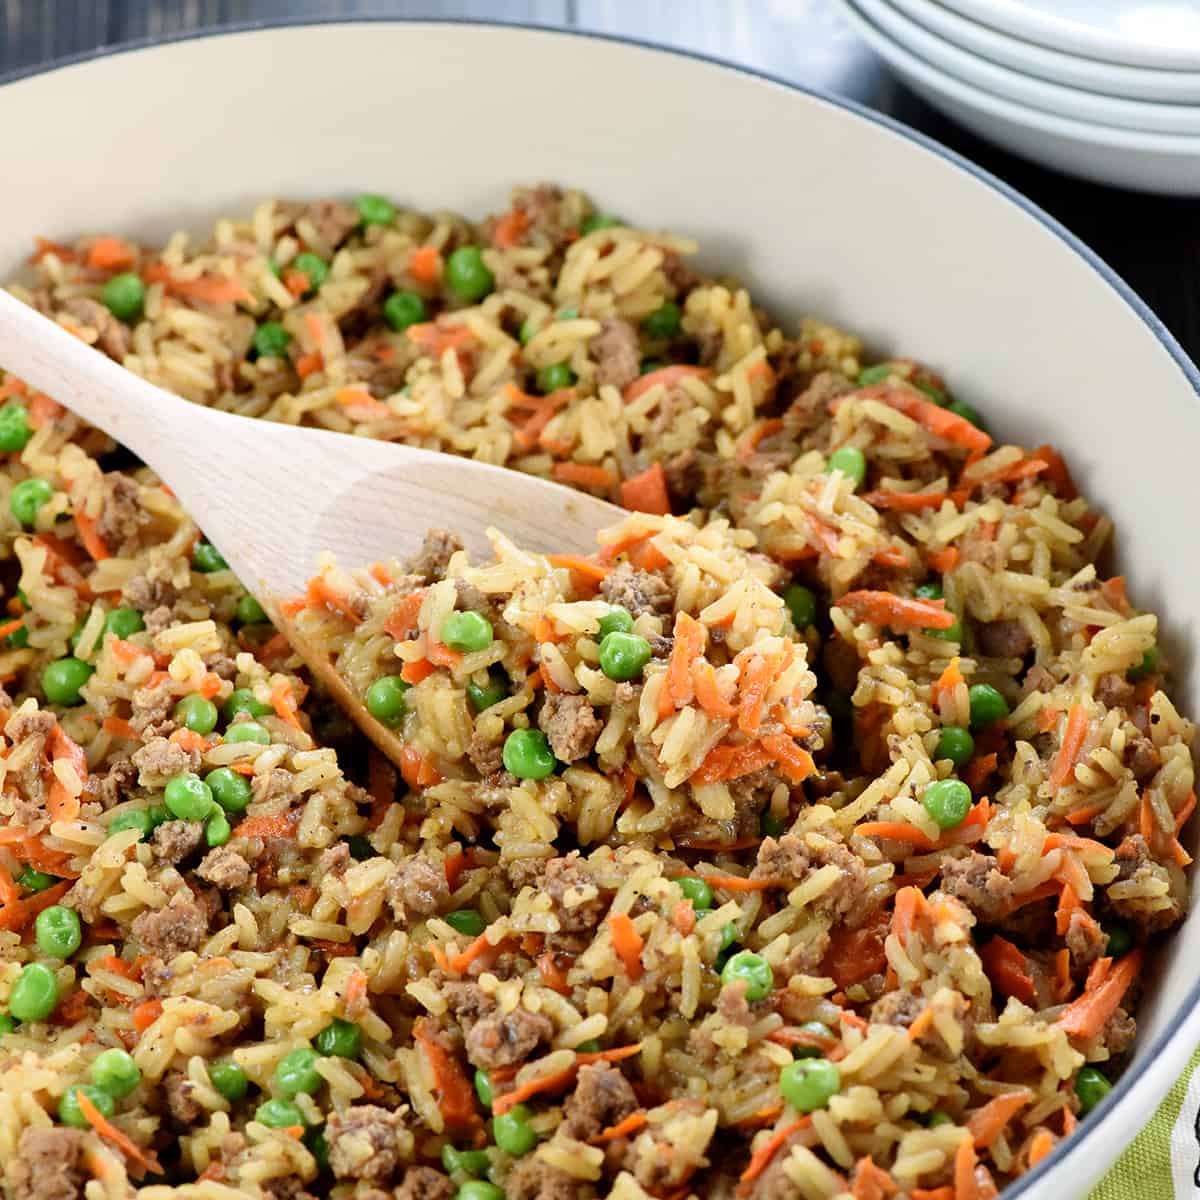 https://www.fivehearthome.com/wp-content/uploads/2018/02/One-Pan-Asian-Beef-and-Rice-Recipe_1200pxSquare.jpg